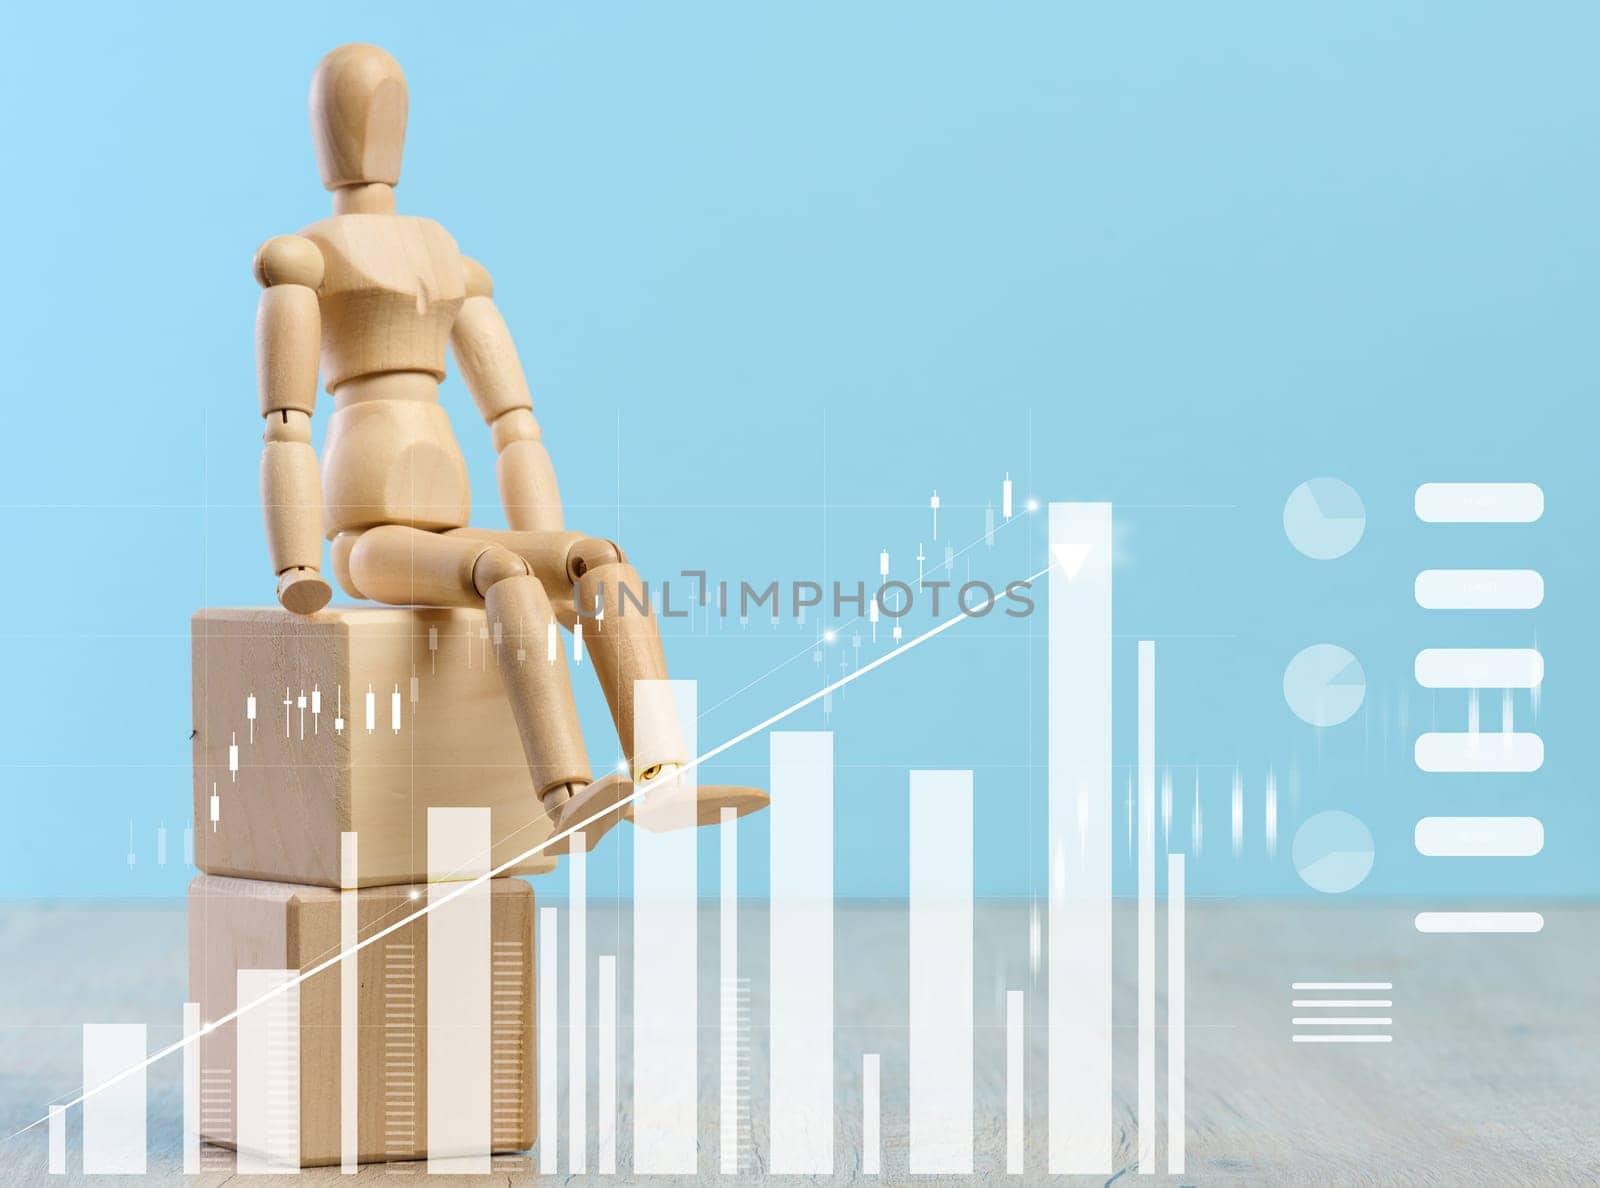 Wooden mannequin and graph with growing indicators on a blue background by ndanko